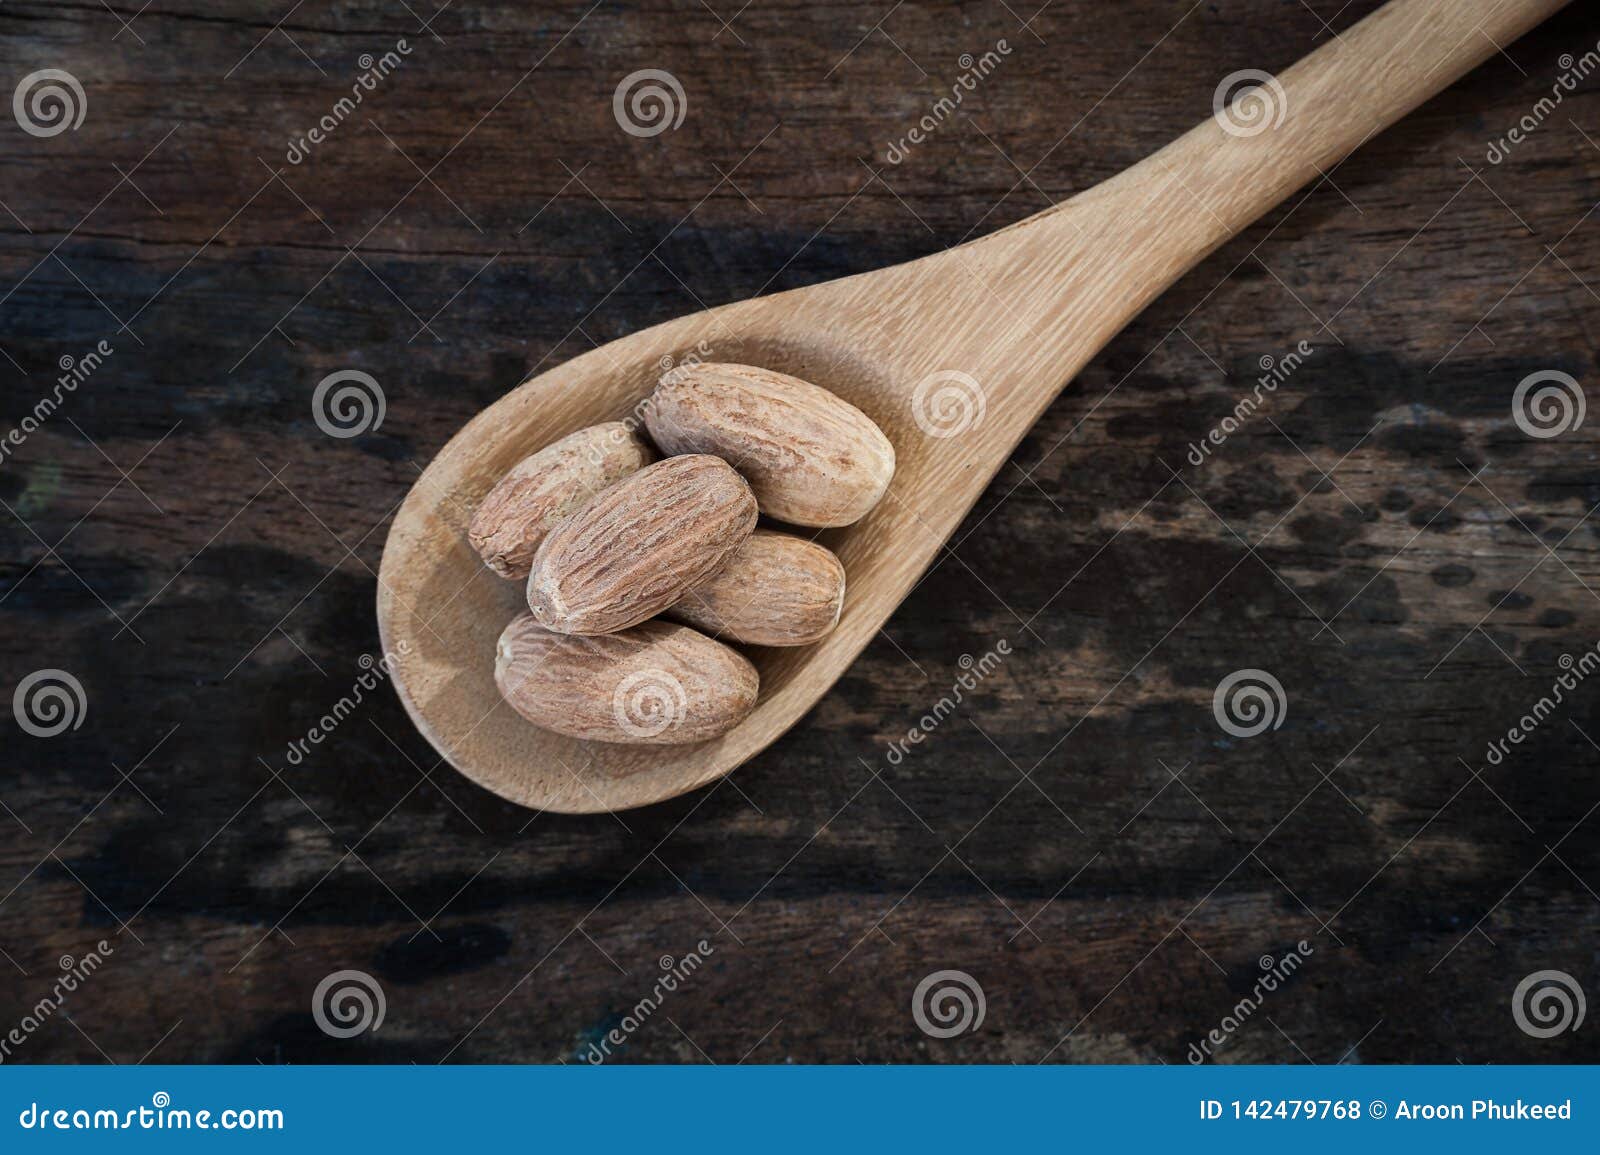 nutmeg on wooden spoon over wooden background.